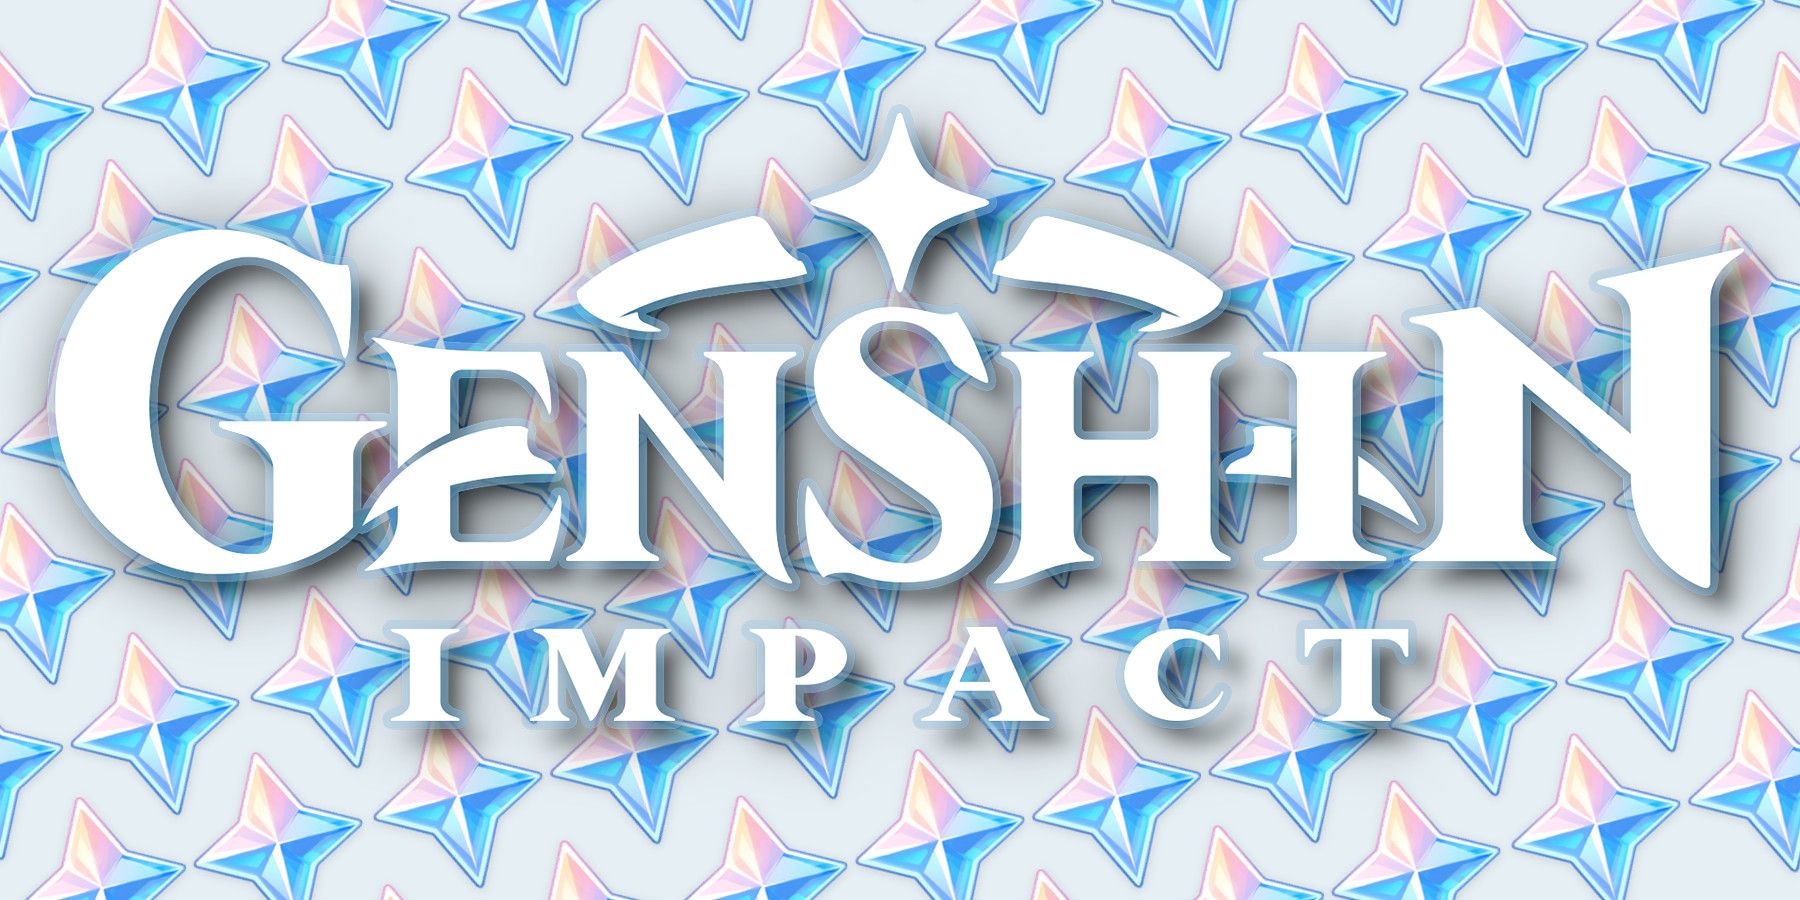 How to get promo codes for Genshin Impact?